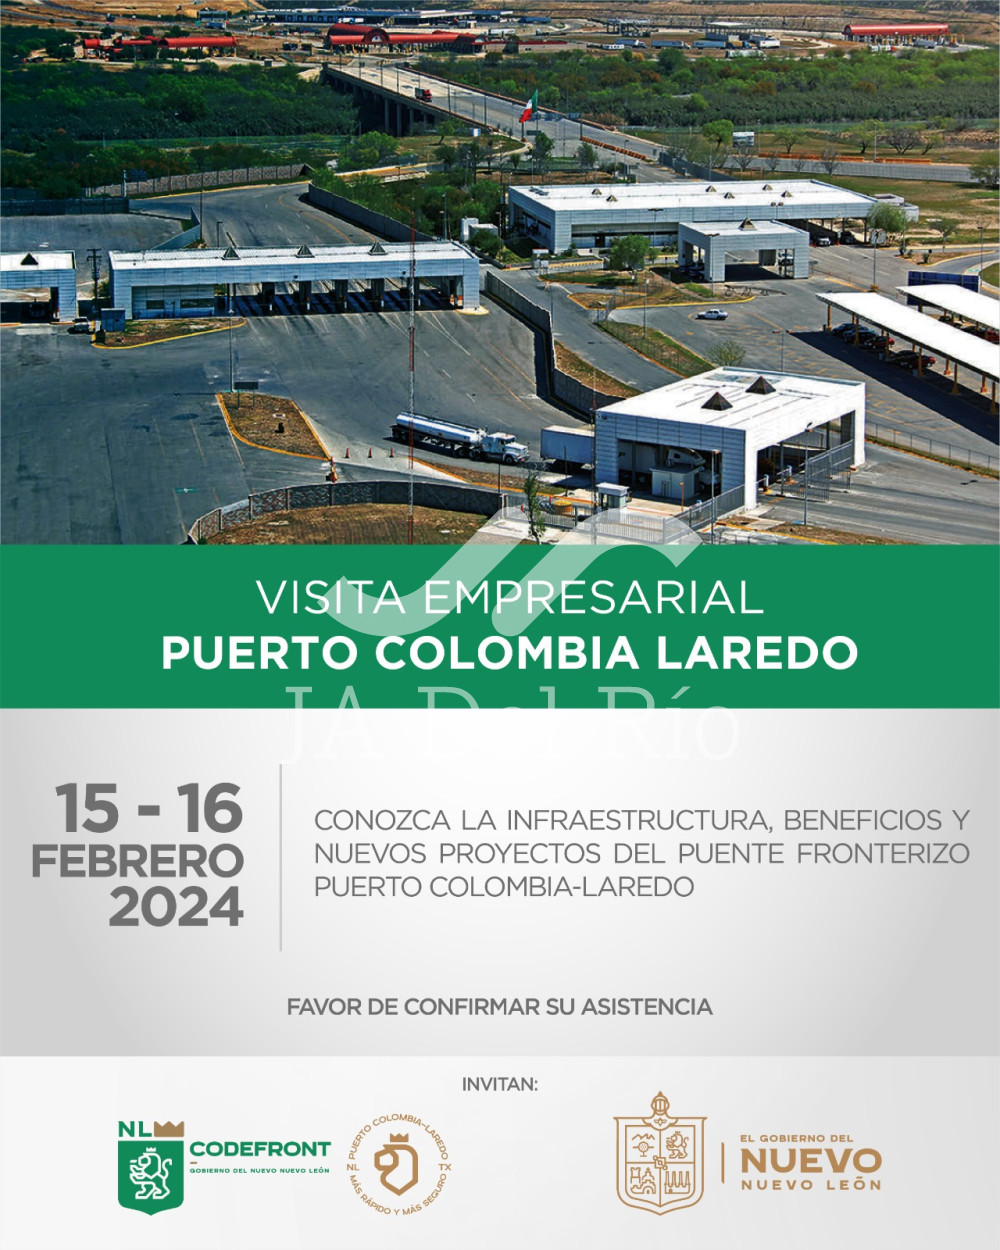 Business Visit to Puerto Colombia Laredo